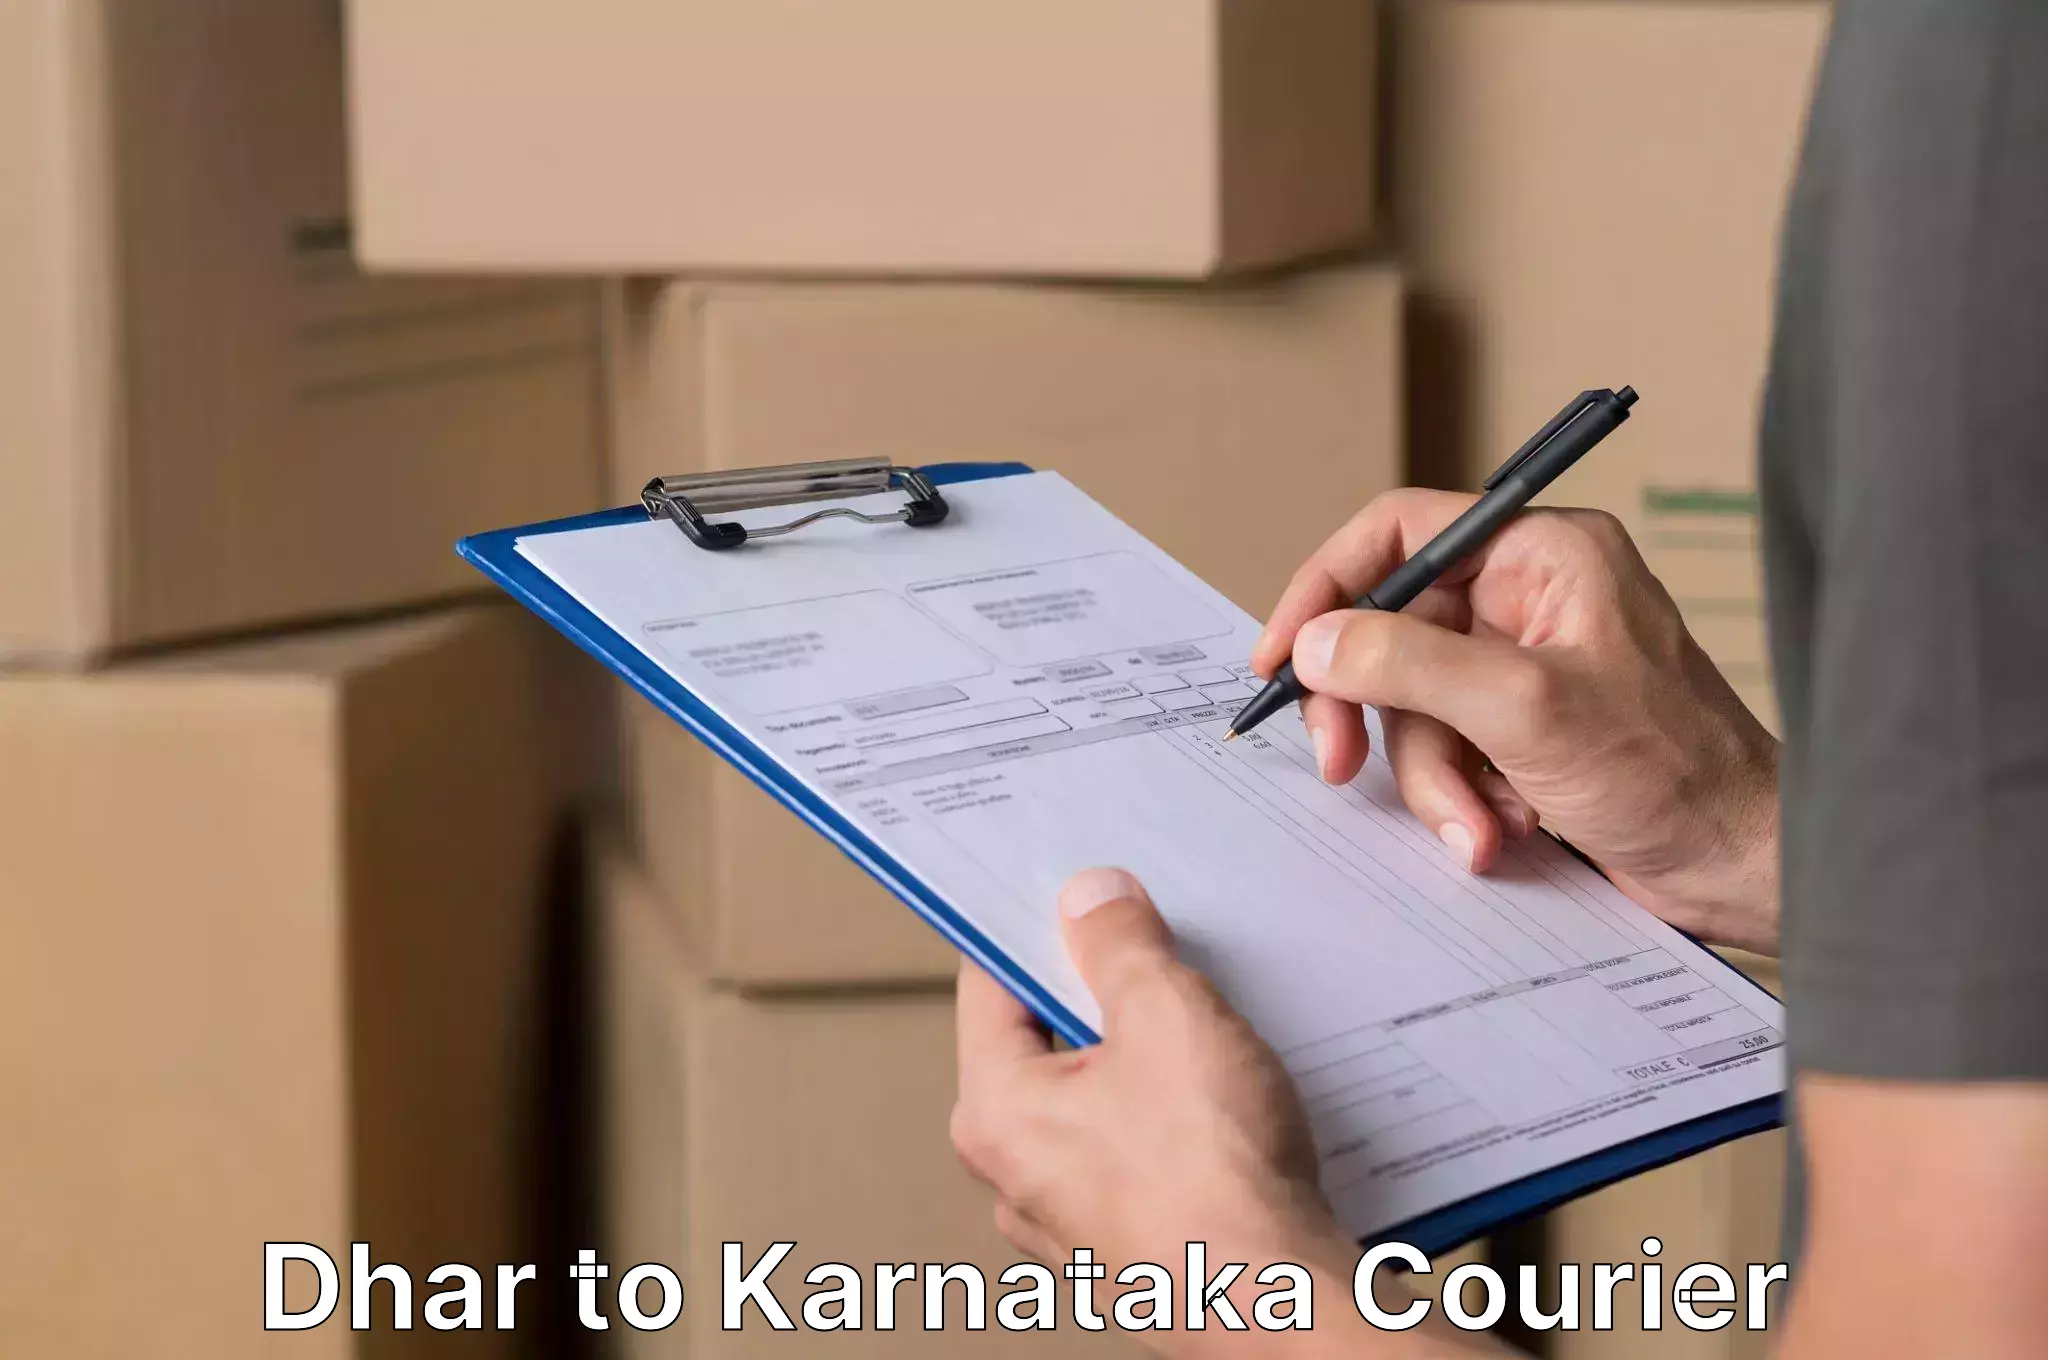 Quality relocation services Dhar to Kanjarakatte